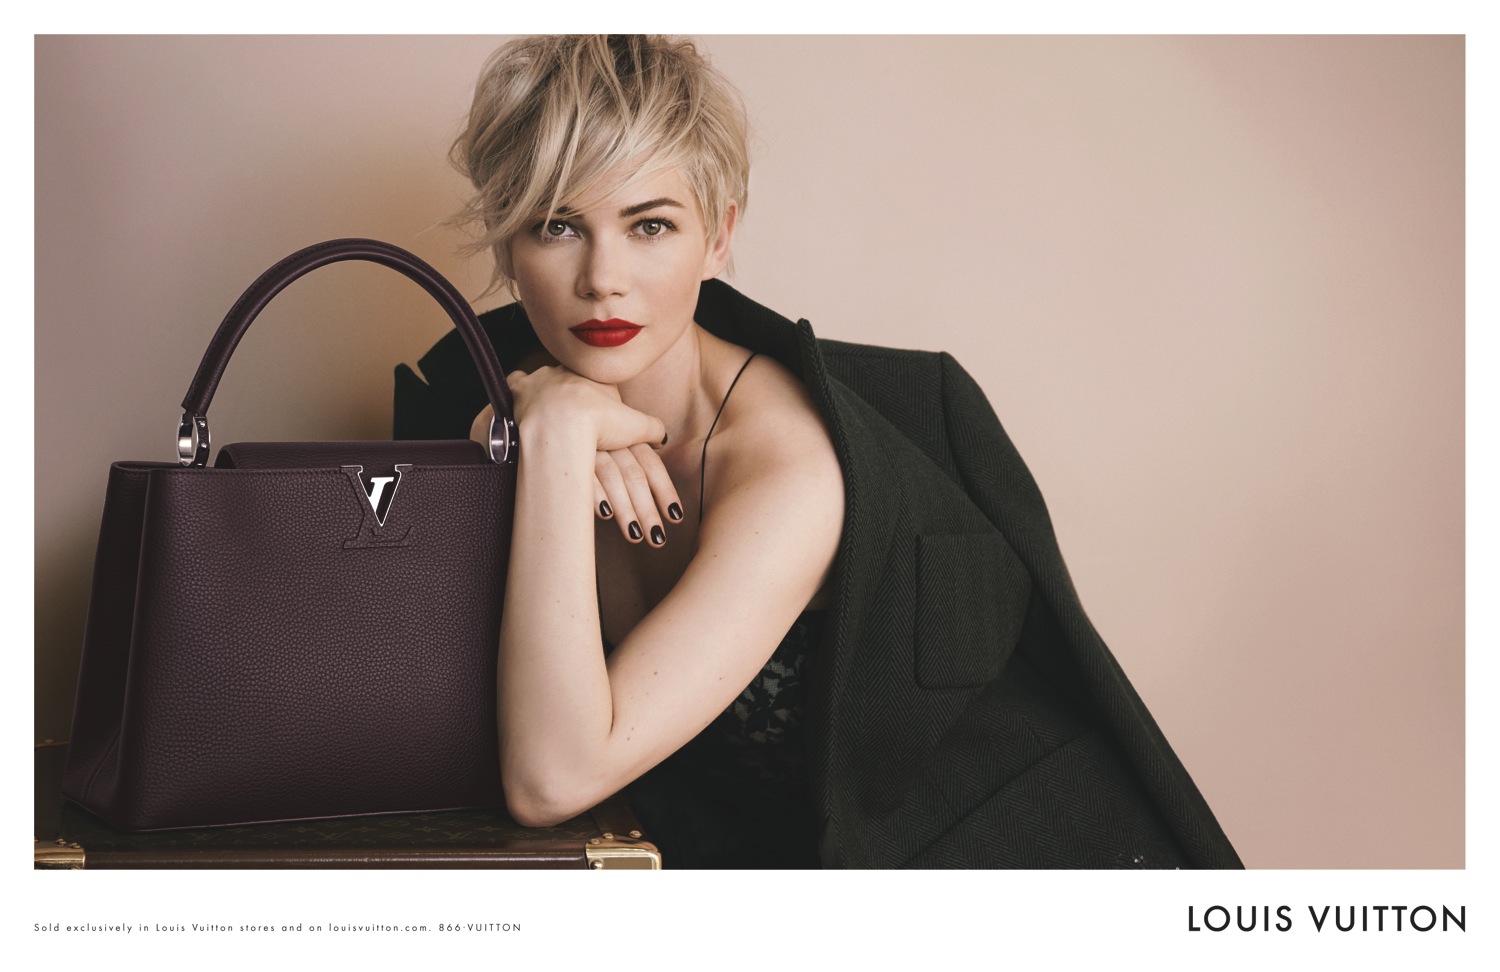 Petite Malle to Neverfull: 13 most popular Louis Vuitton bags to invest in  - Luxury News Africa